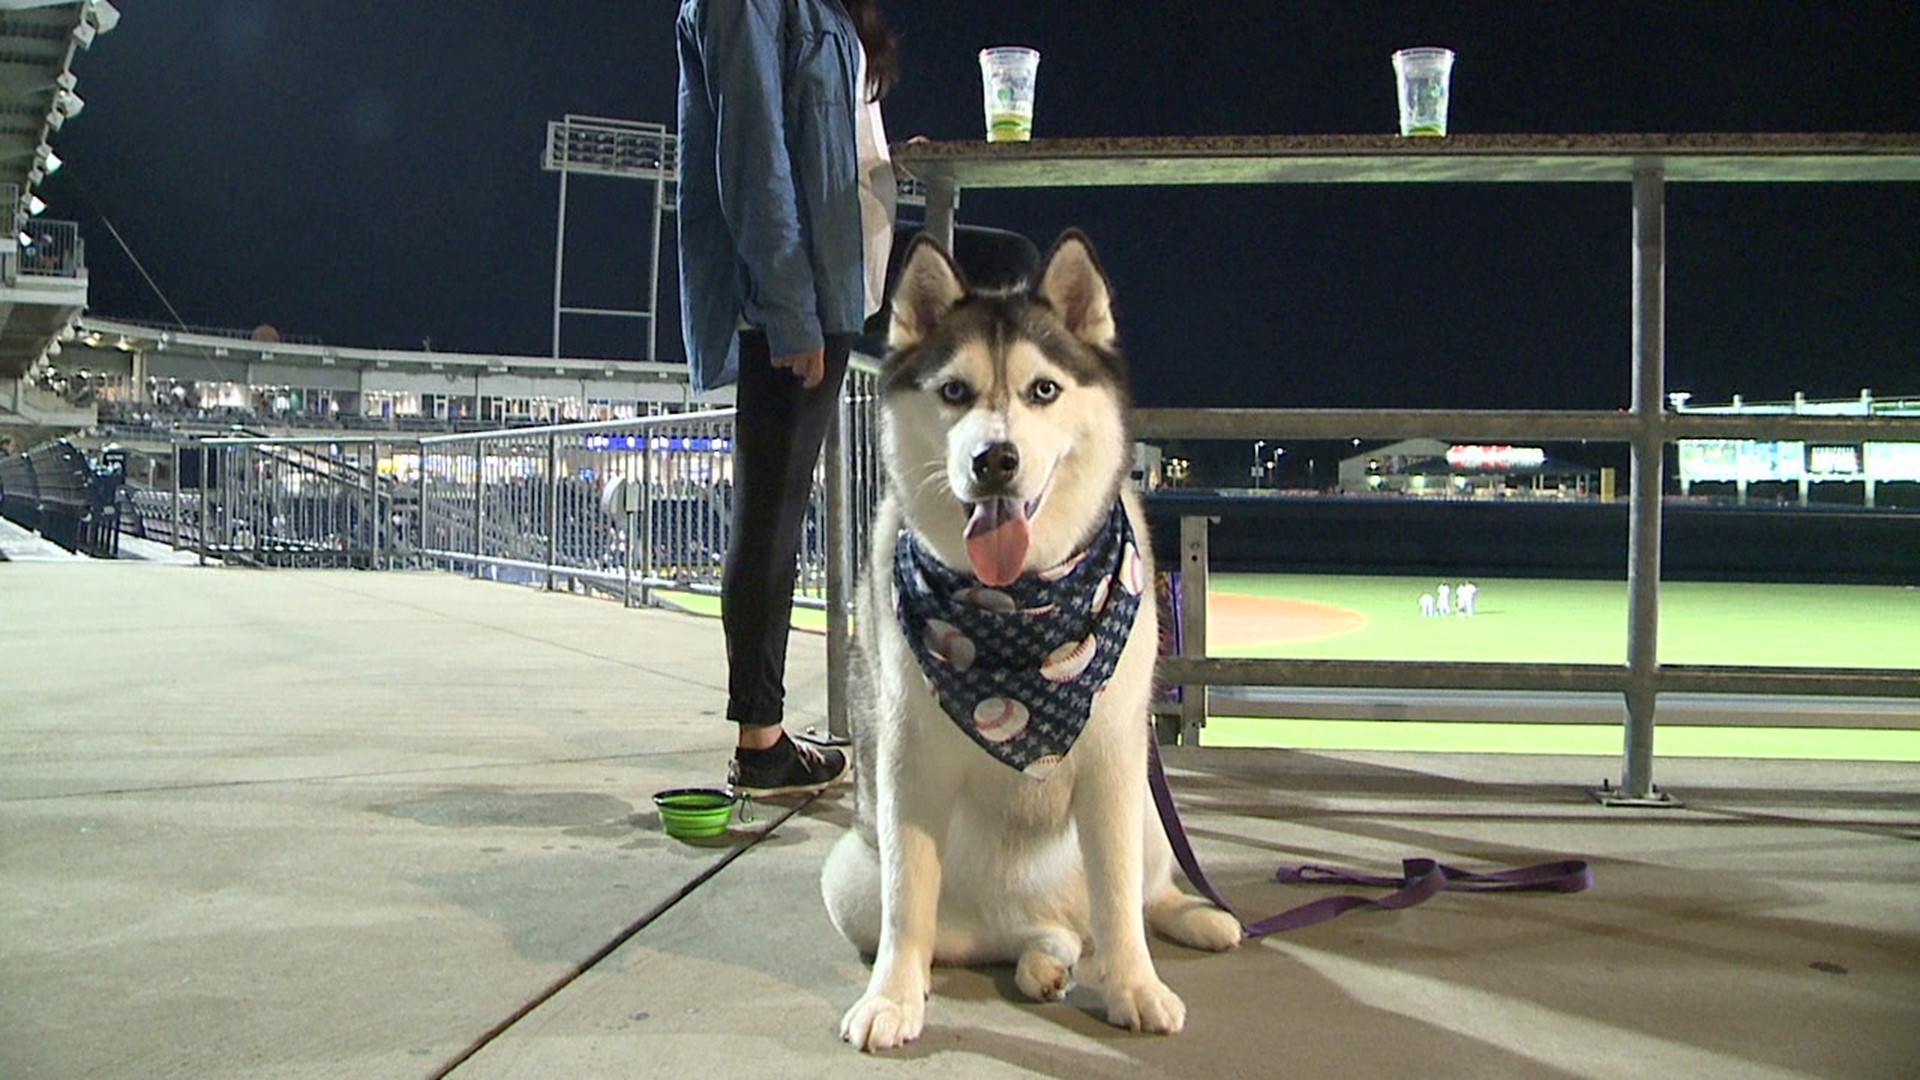 For every Wednesday home game, fans were allowed to bring their dogs to roam around the ballpark.